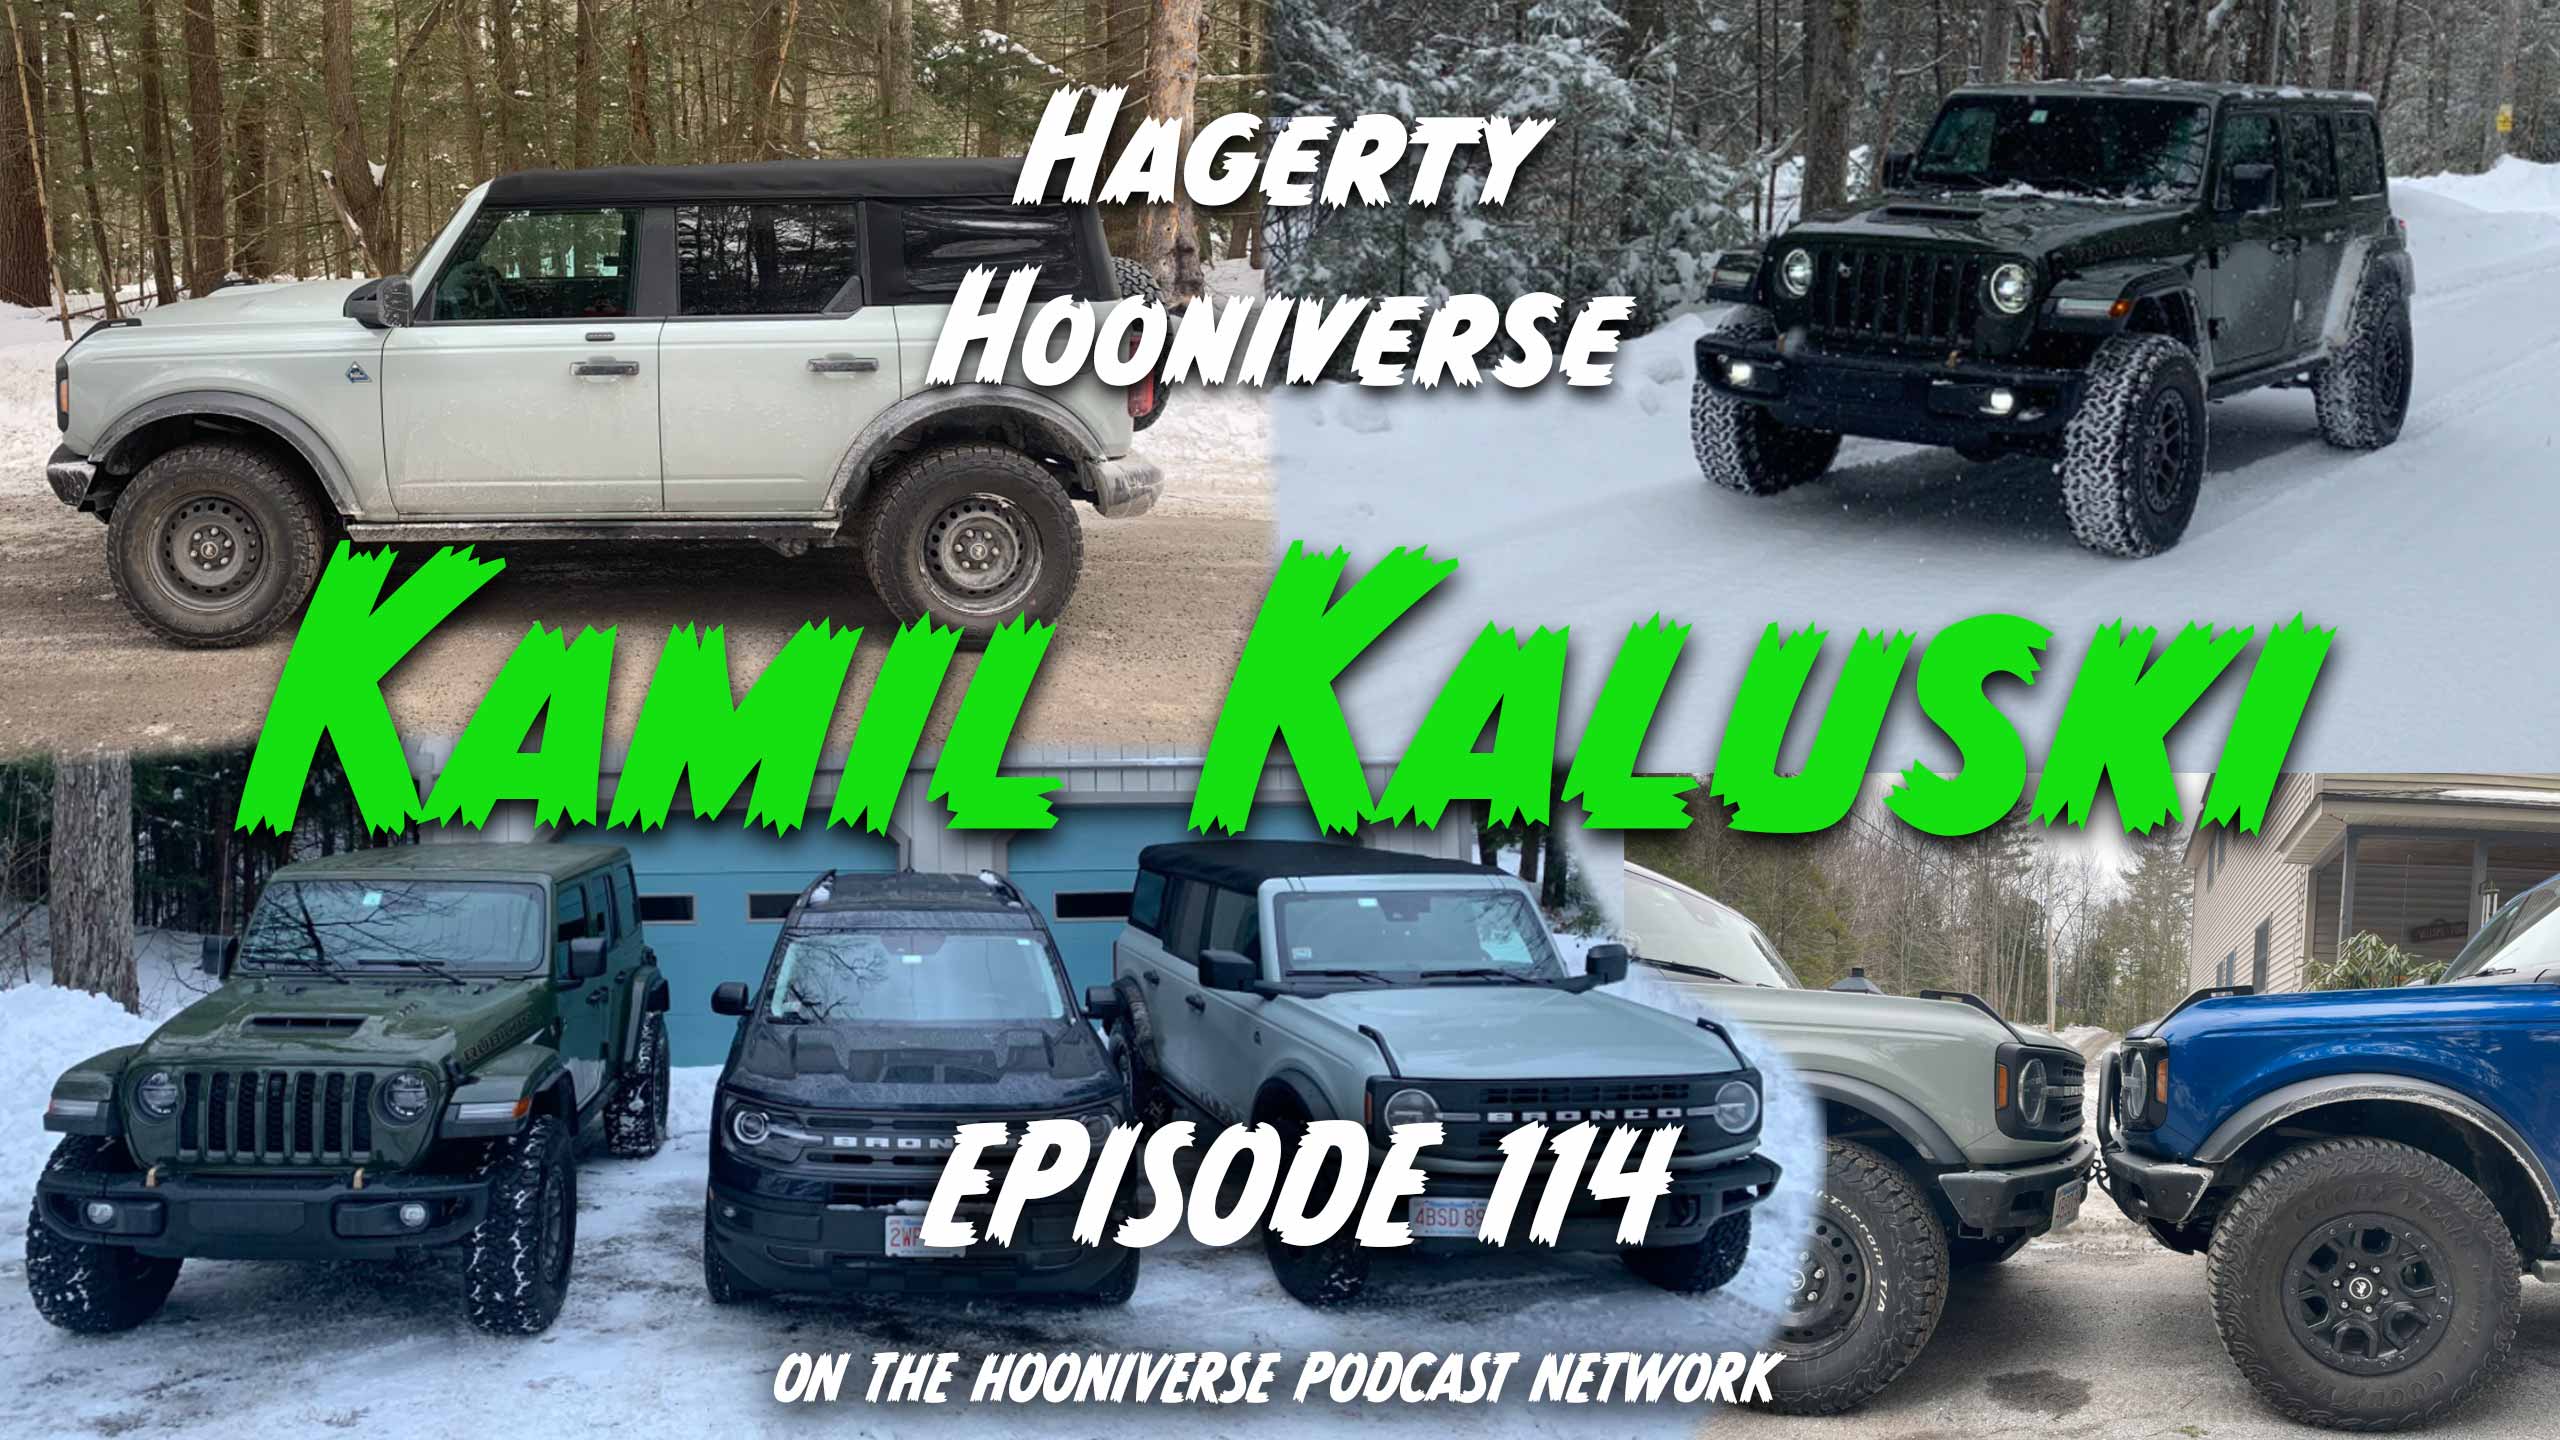 Kamil-Kaluski-Hagerty-Off-The-Road-Again-Podcast-Episode-114